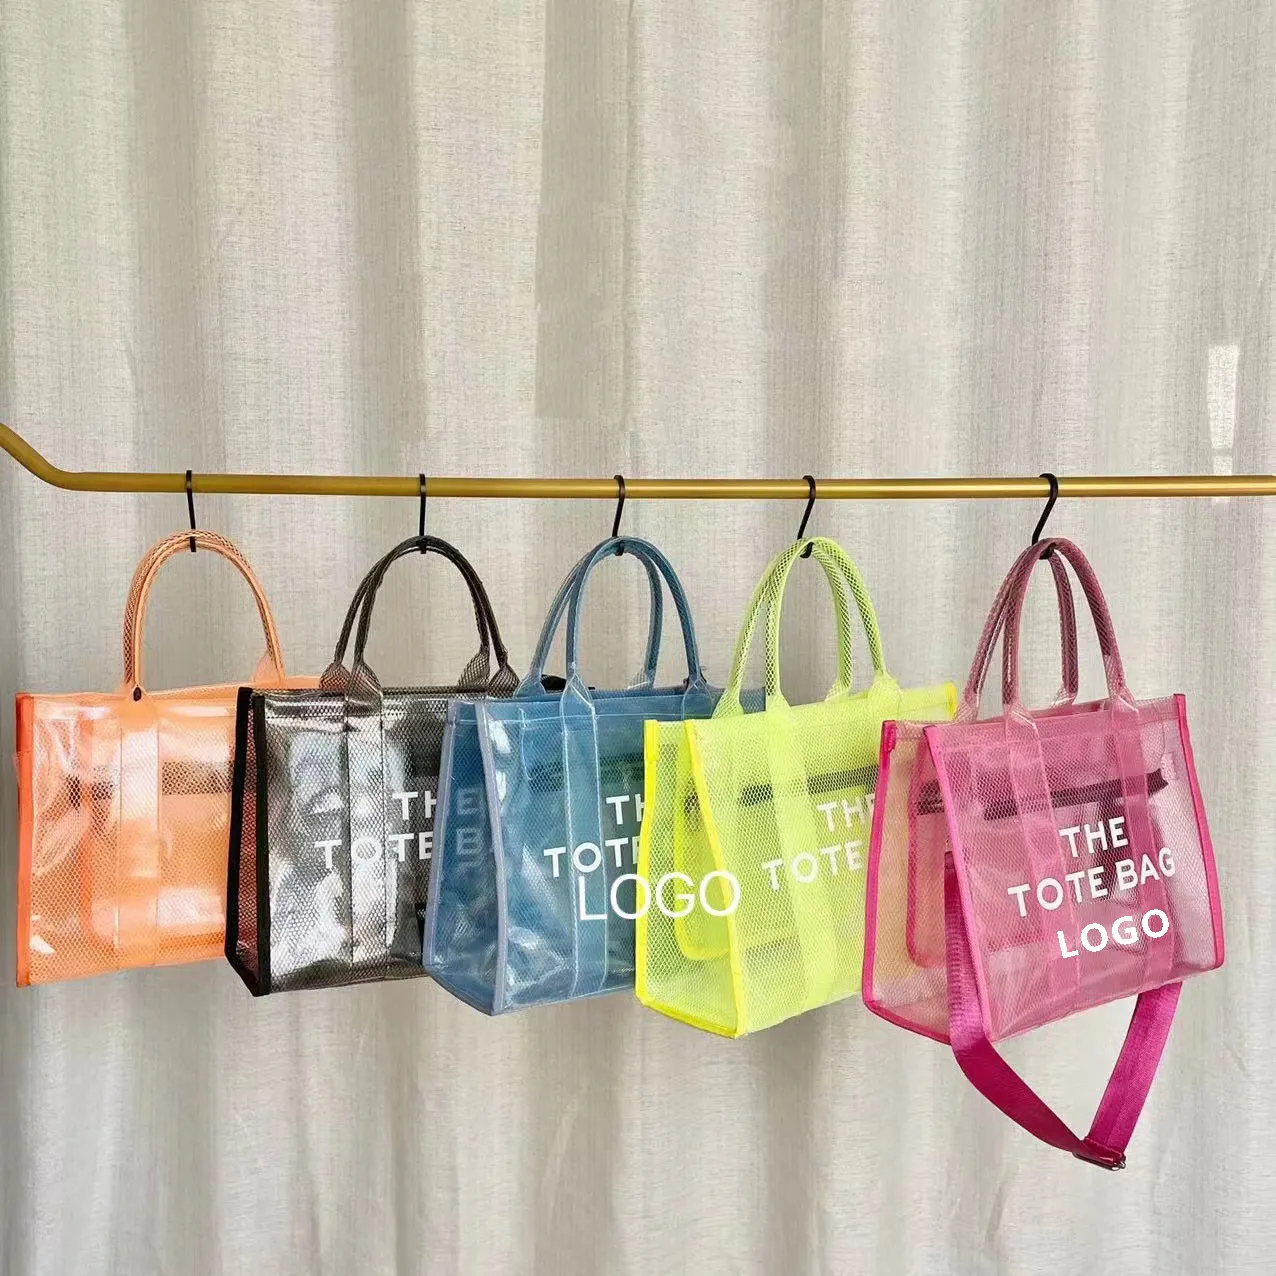 BM9288 Brand Marc Tote handbags New High Quality PVC Jelly Bag 2022 Online Shopping Large Capacity Womens Tote Bags Bags